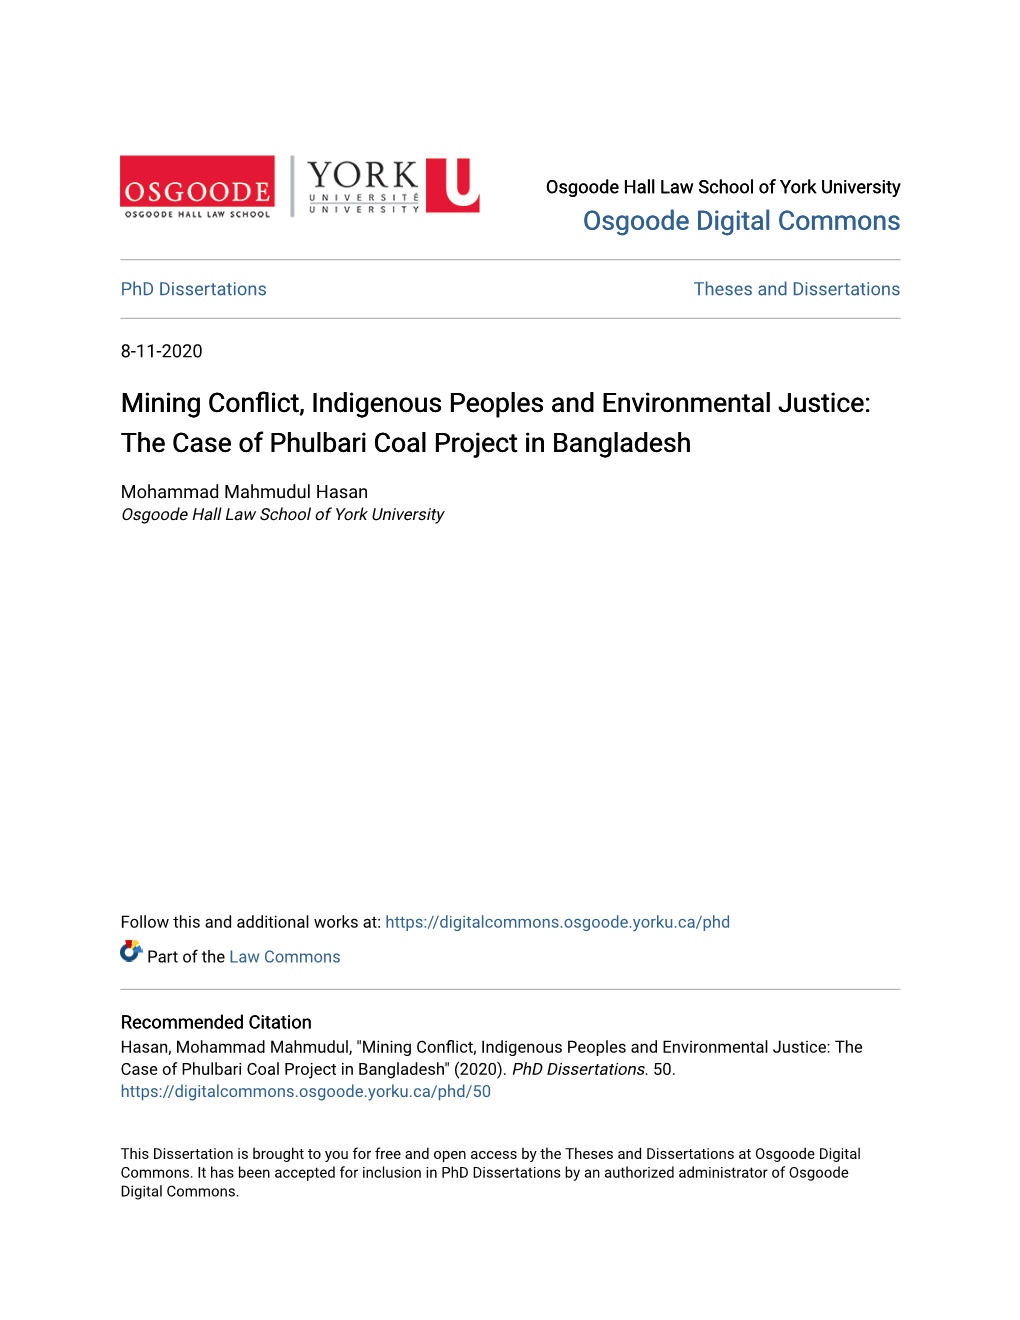 Mining Conflict, Indigenous Peoples and Environmental Justice: the Case of Phulbari Coal Project in Bangladesh" (2020)